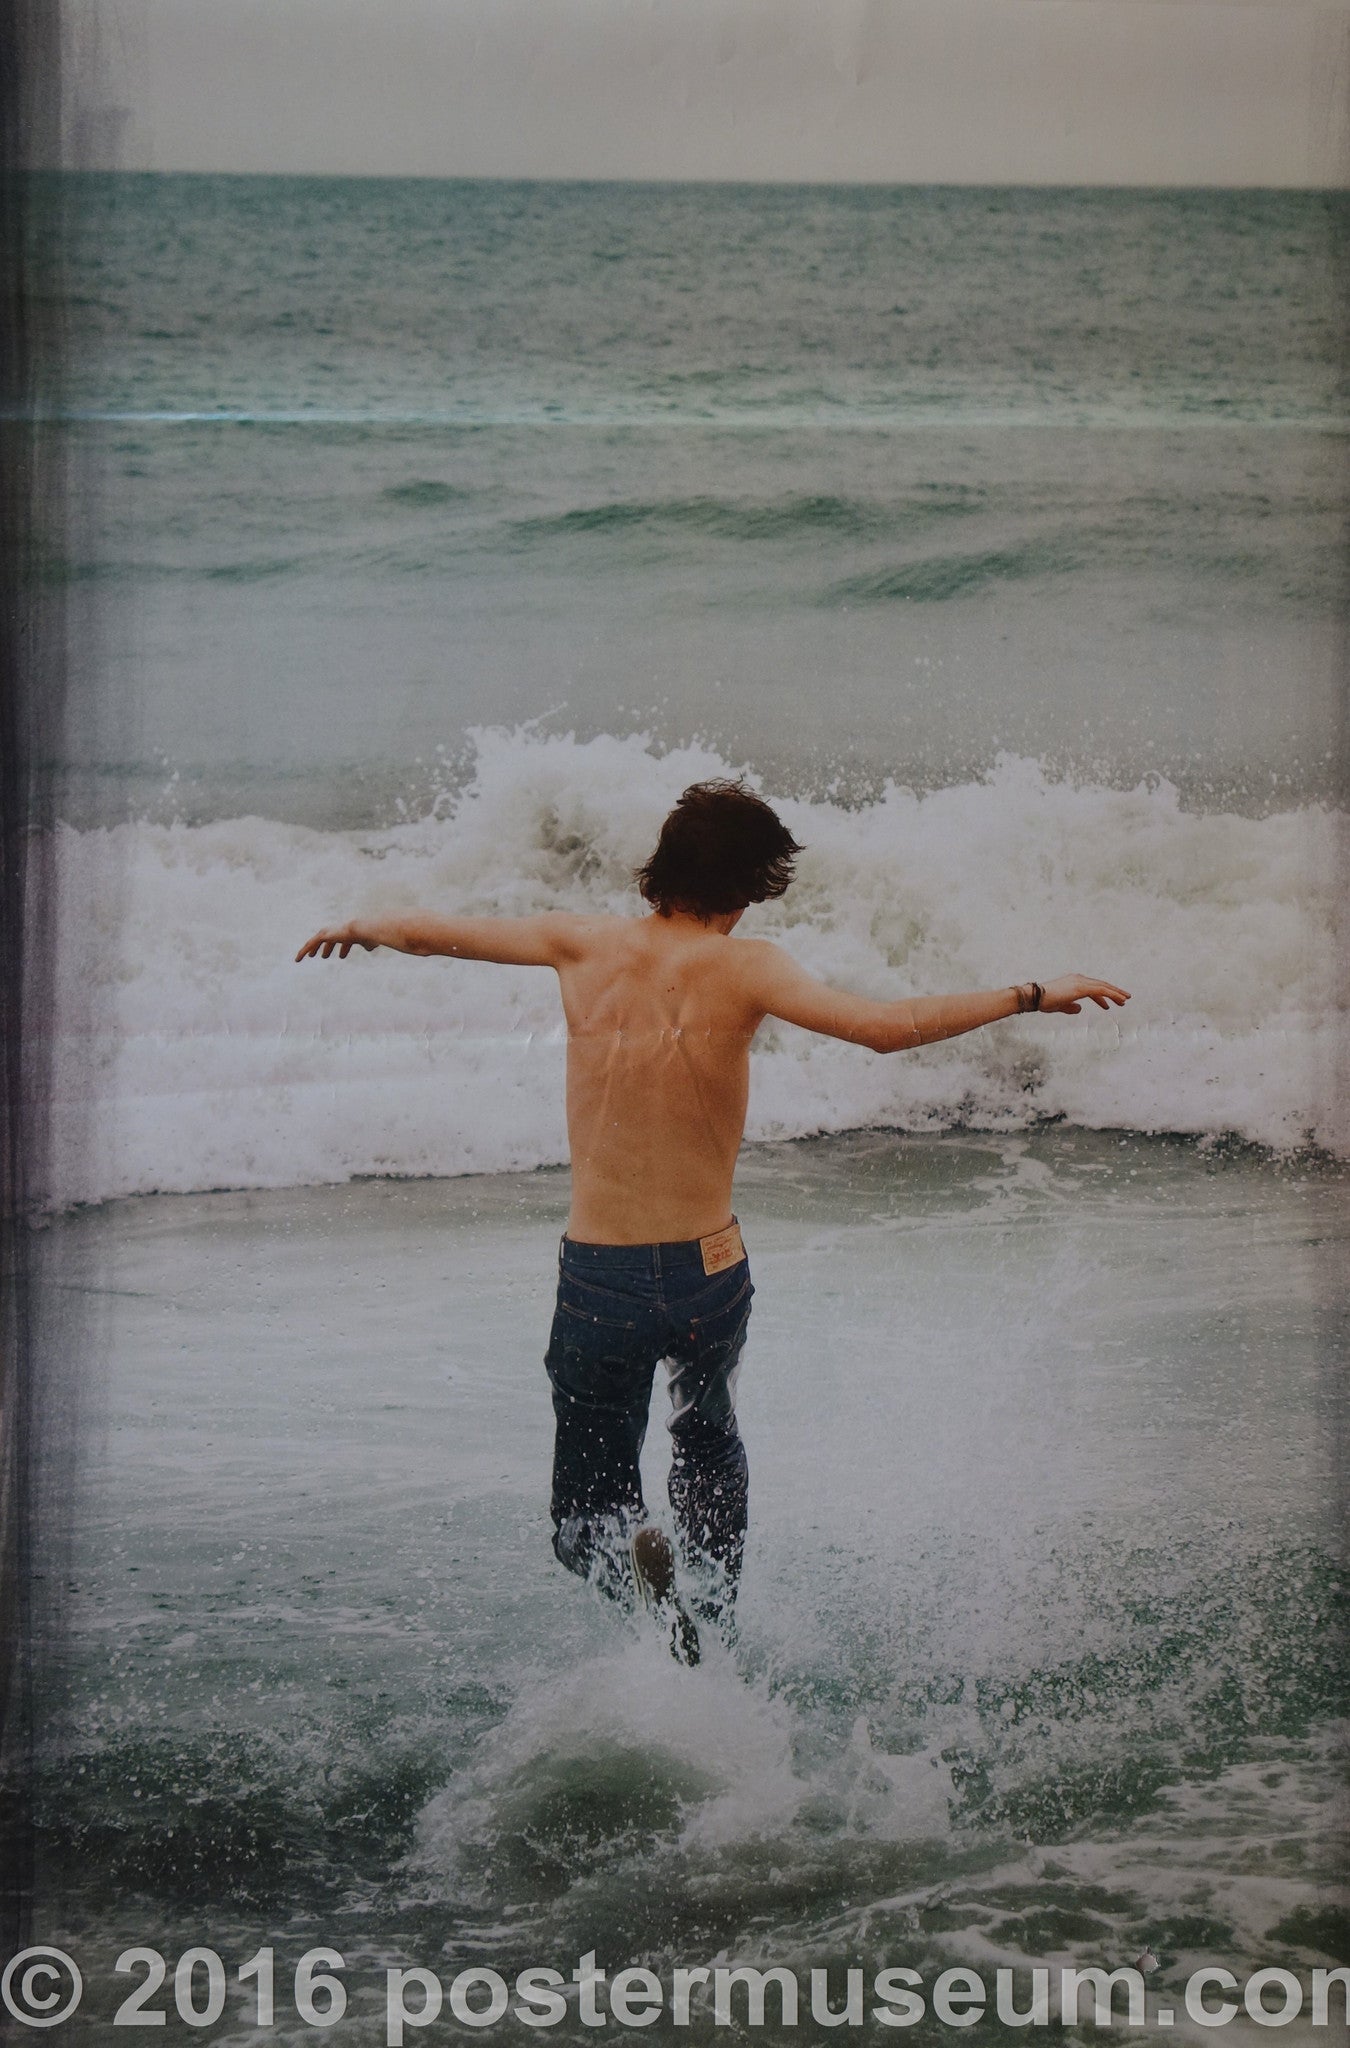 Levi's Running into the Ocean